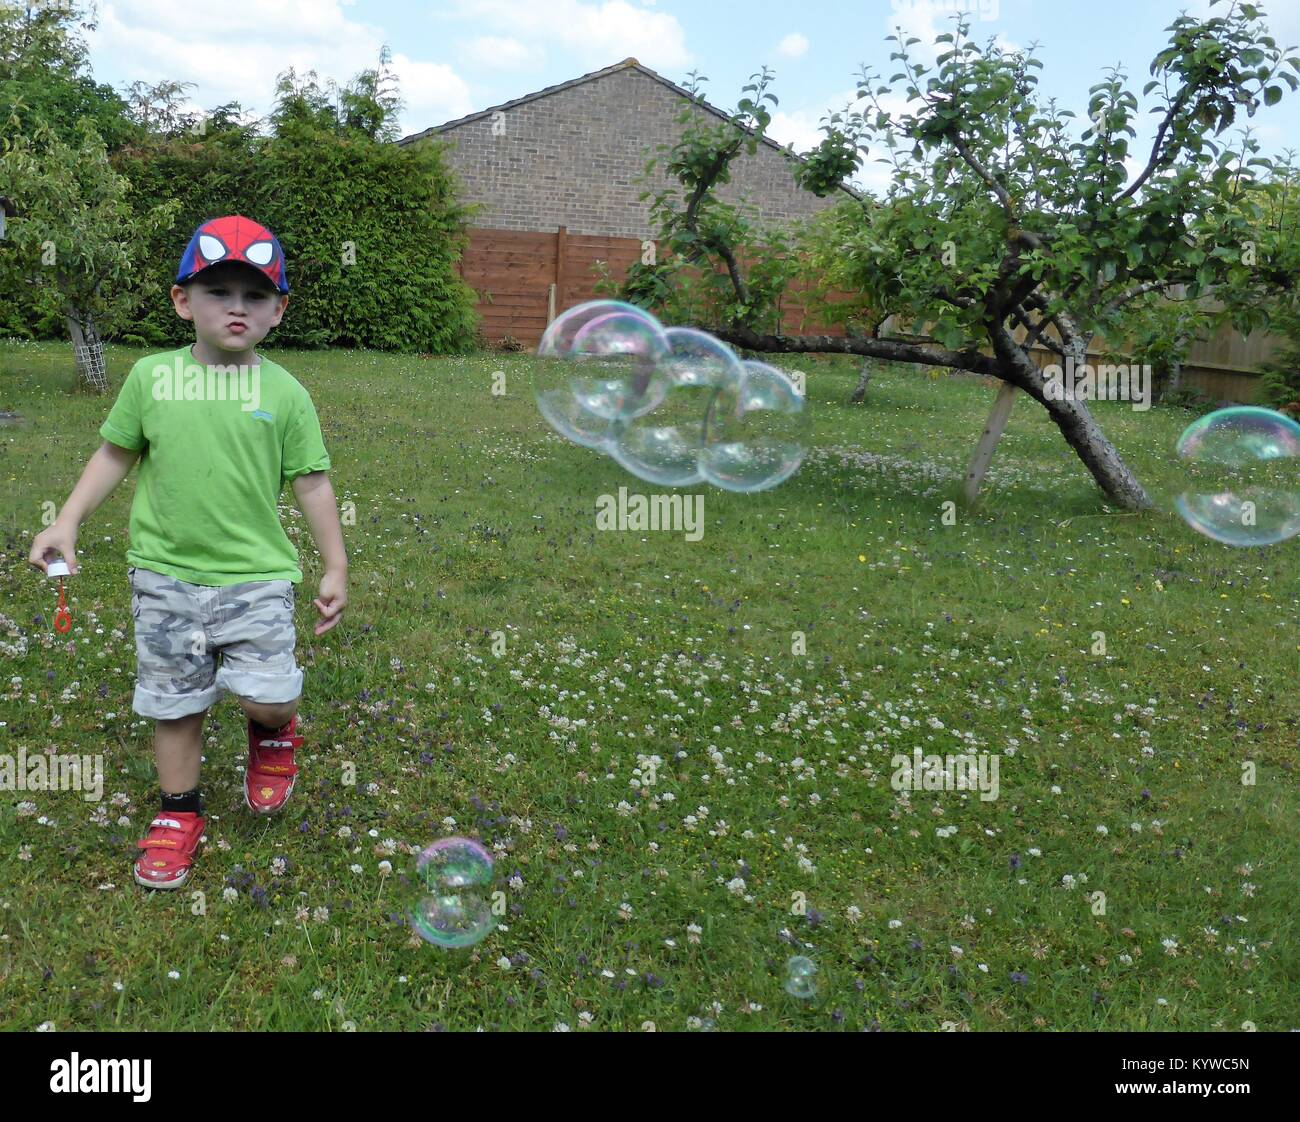 Young boy chasing bubbles in garden Stock Photo